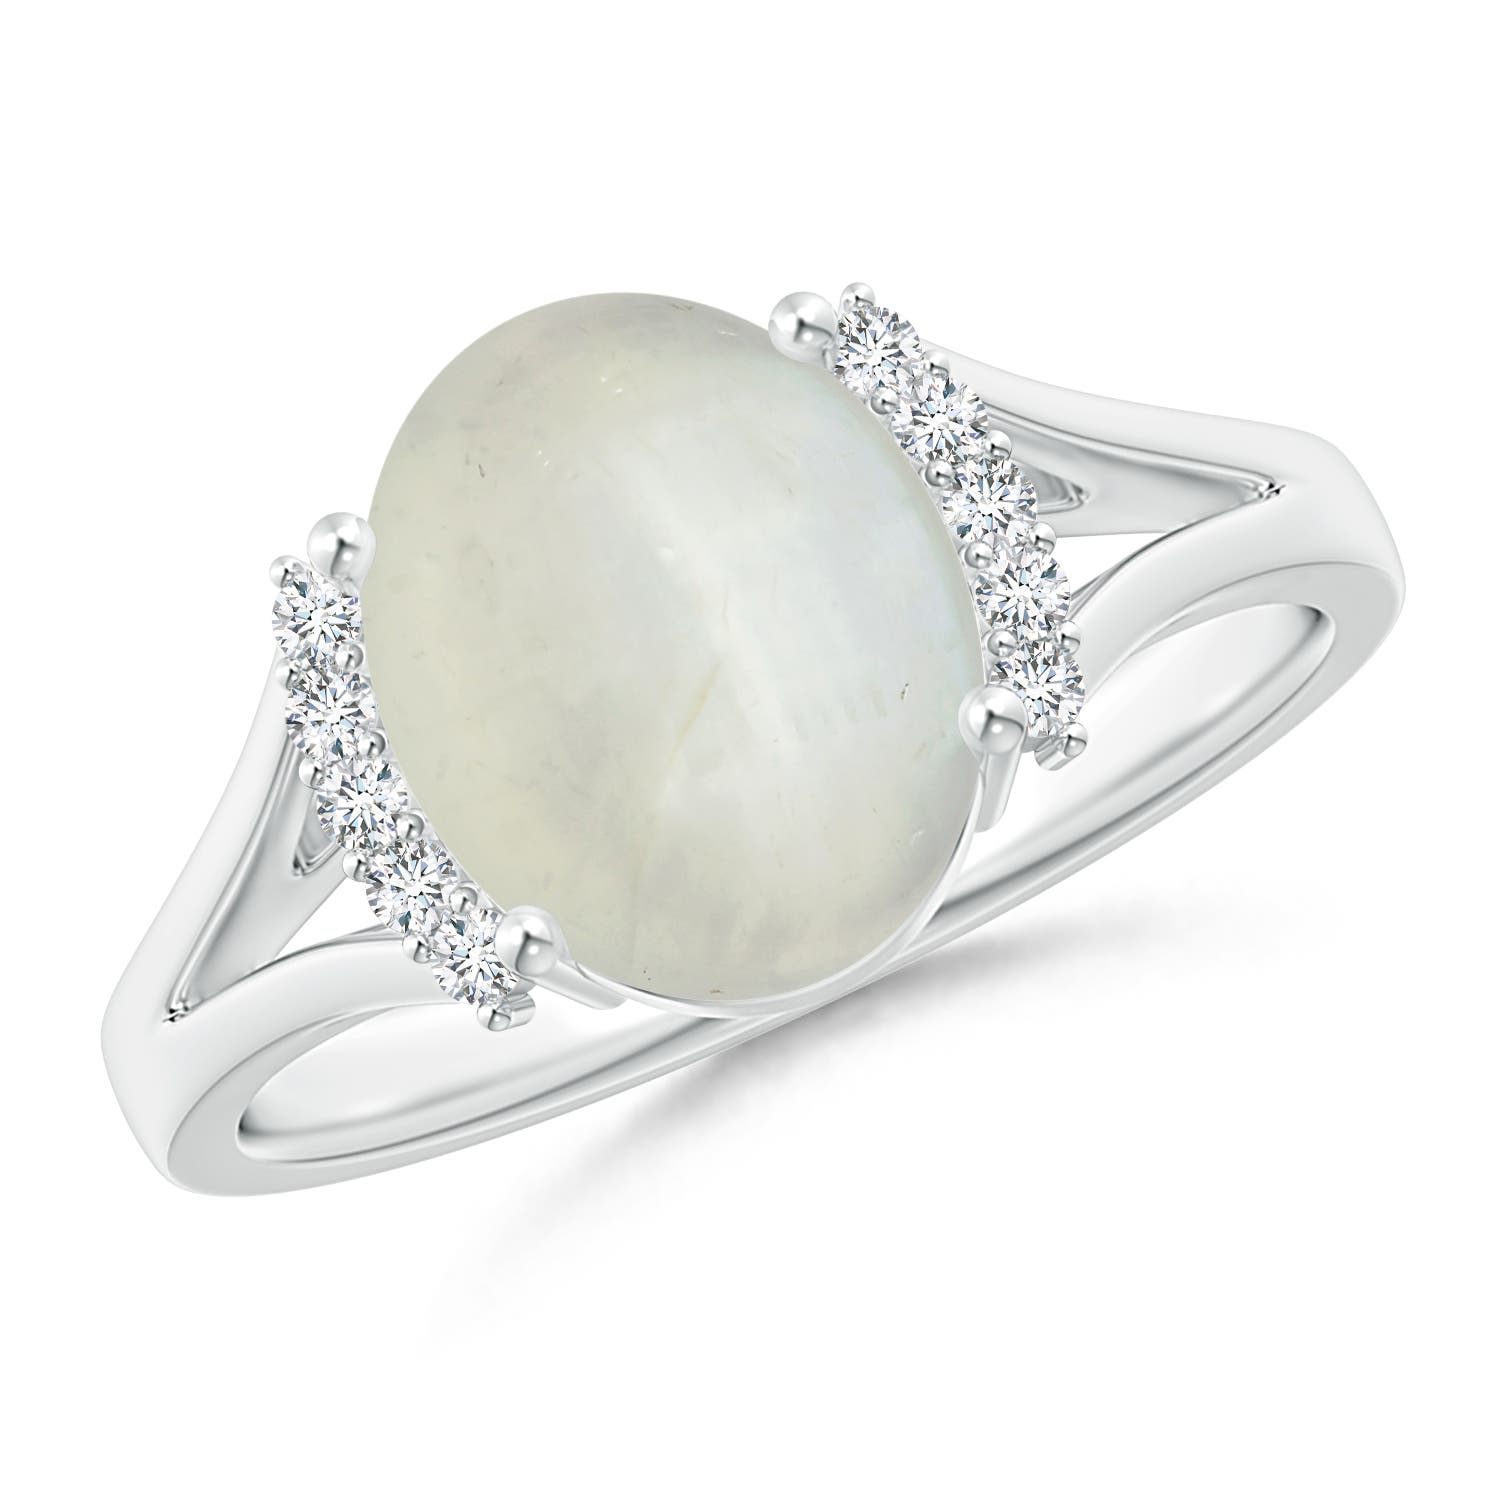 AA - Moonstone / 2.6 CT / 14 KT White Gold